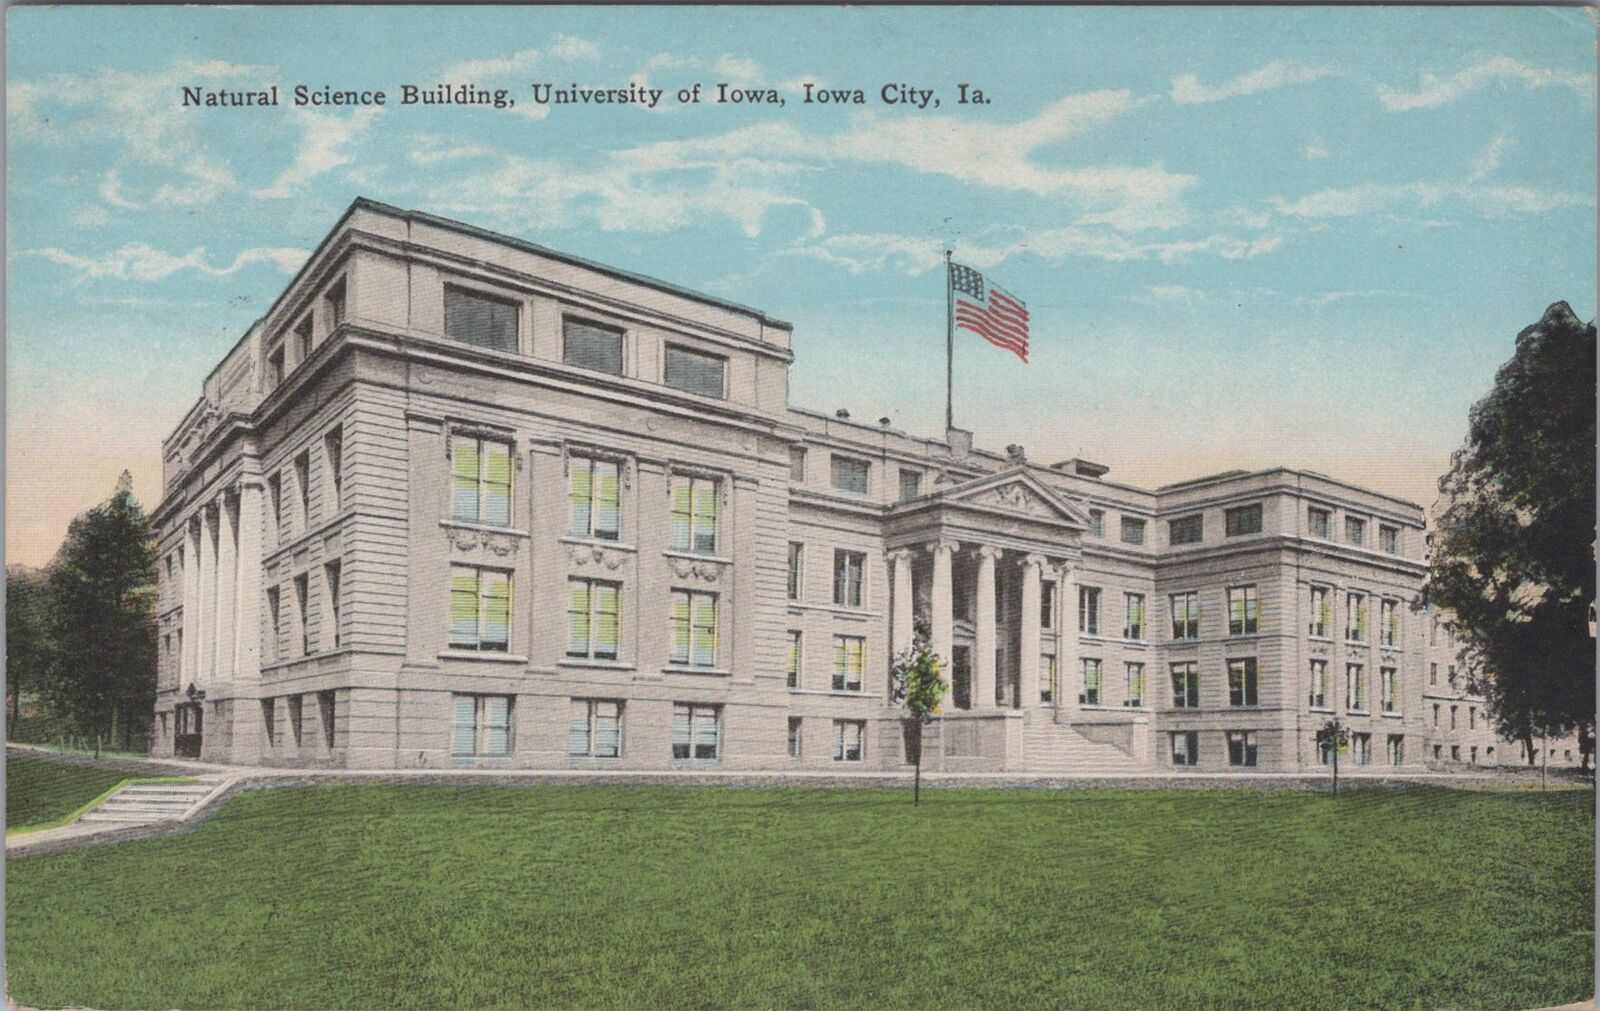 Natural Science Building at University of Iowa in Iowa City 1932 Postcard